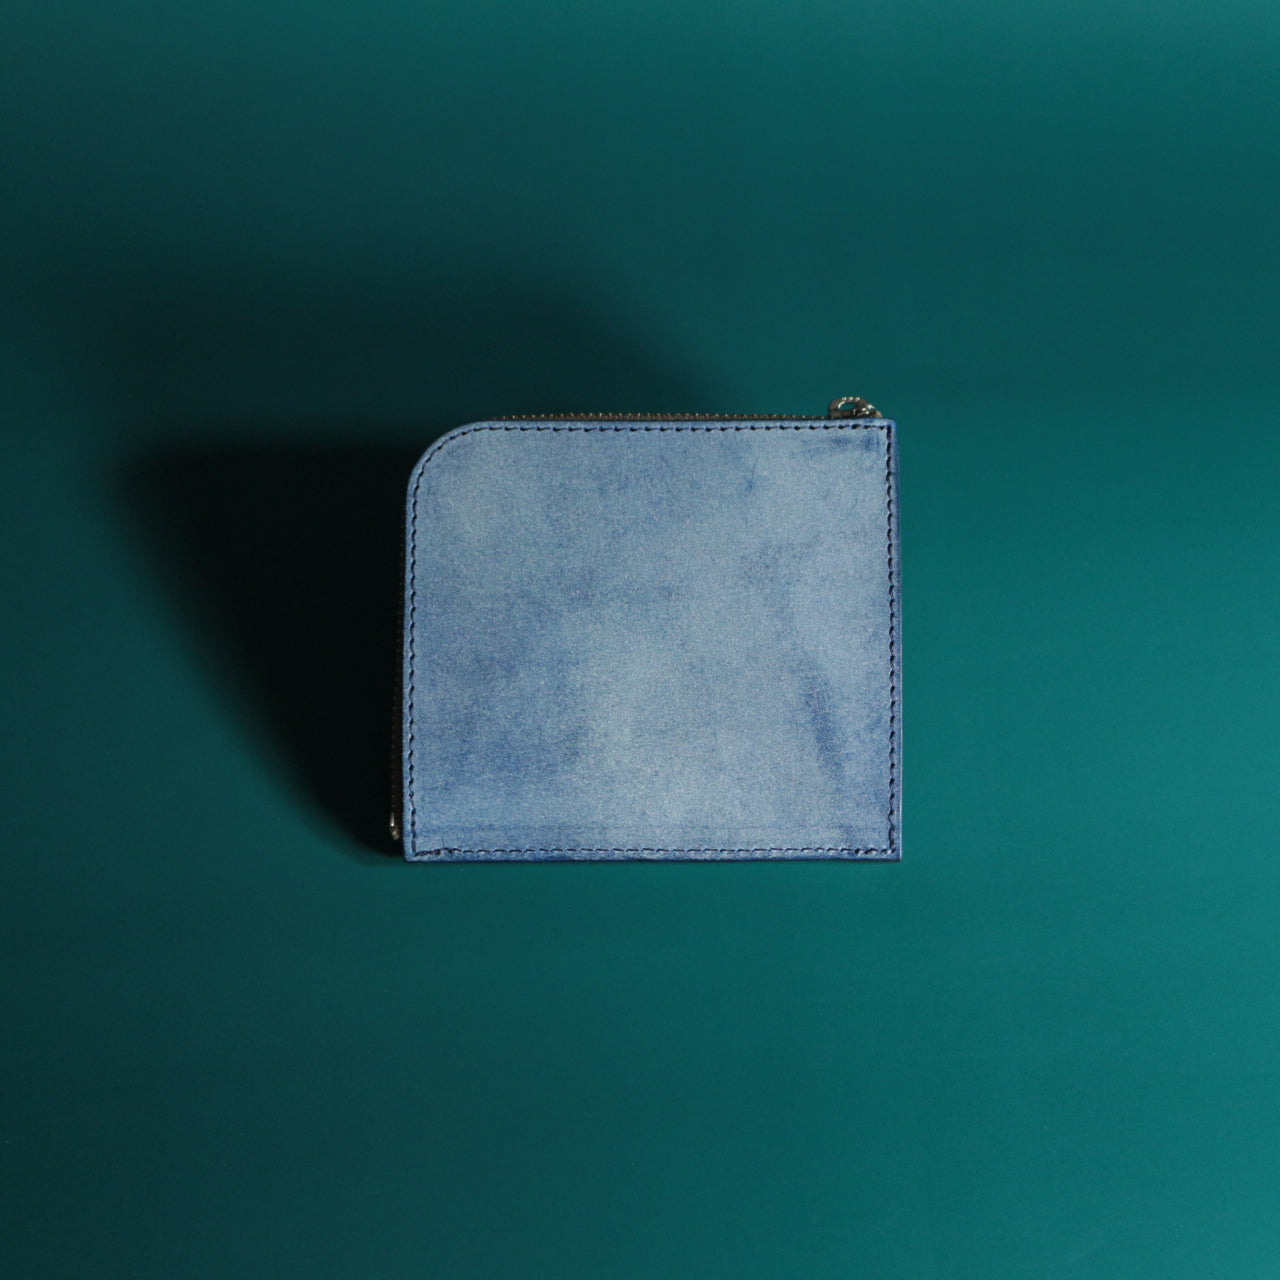 -Valley - Valley thin wallet